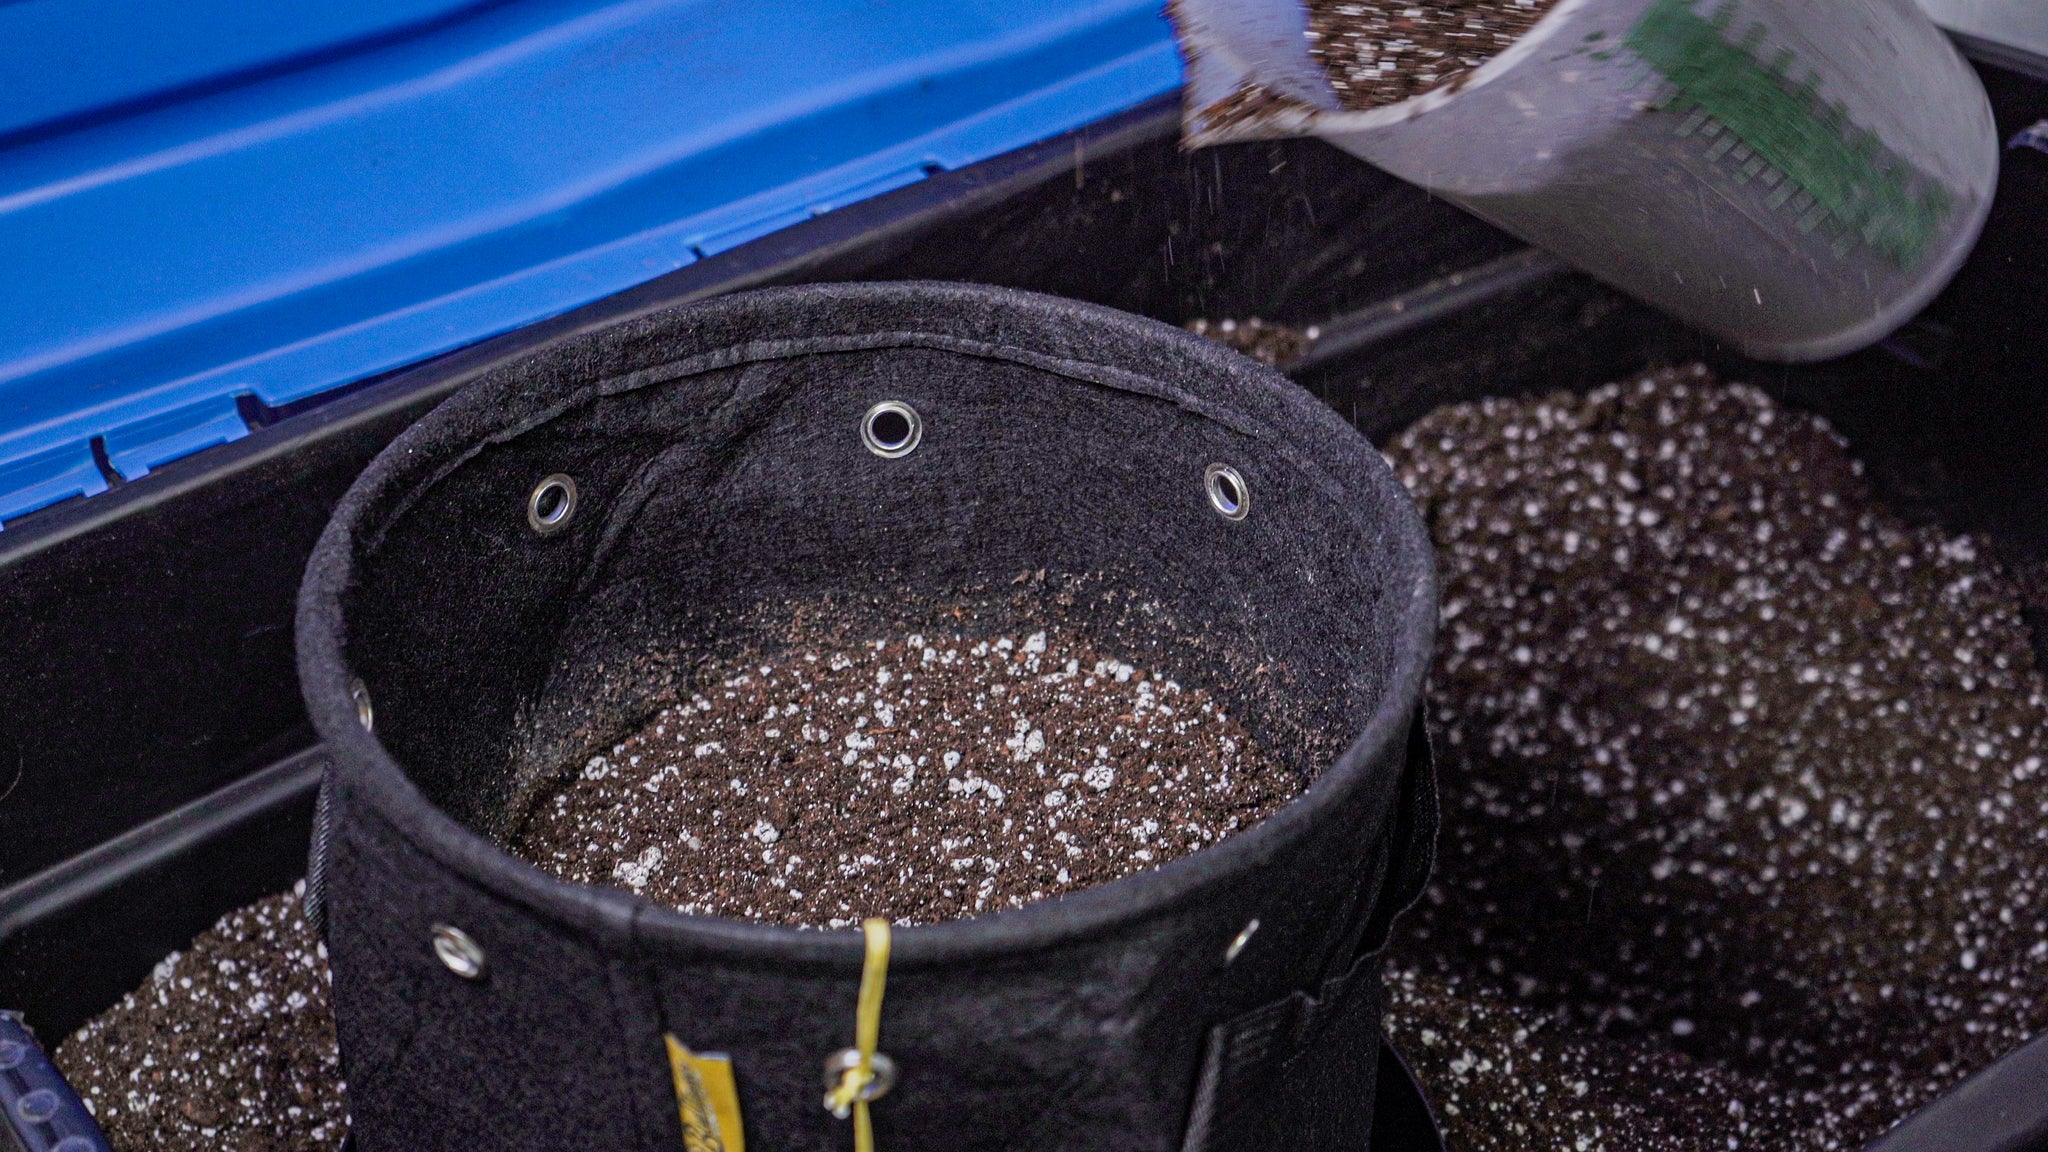 Close-up image of a black fabric BudPots container being filled with soil mix from a gray scooping trowel. The pot is positioned inside a blue storage tub, capturing the motion of soil particles falling into the pot, highlighted by the pot's metal ventilation eyelets.